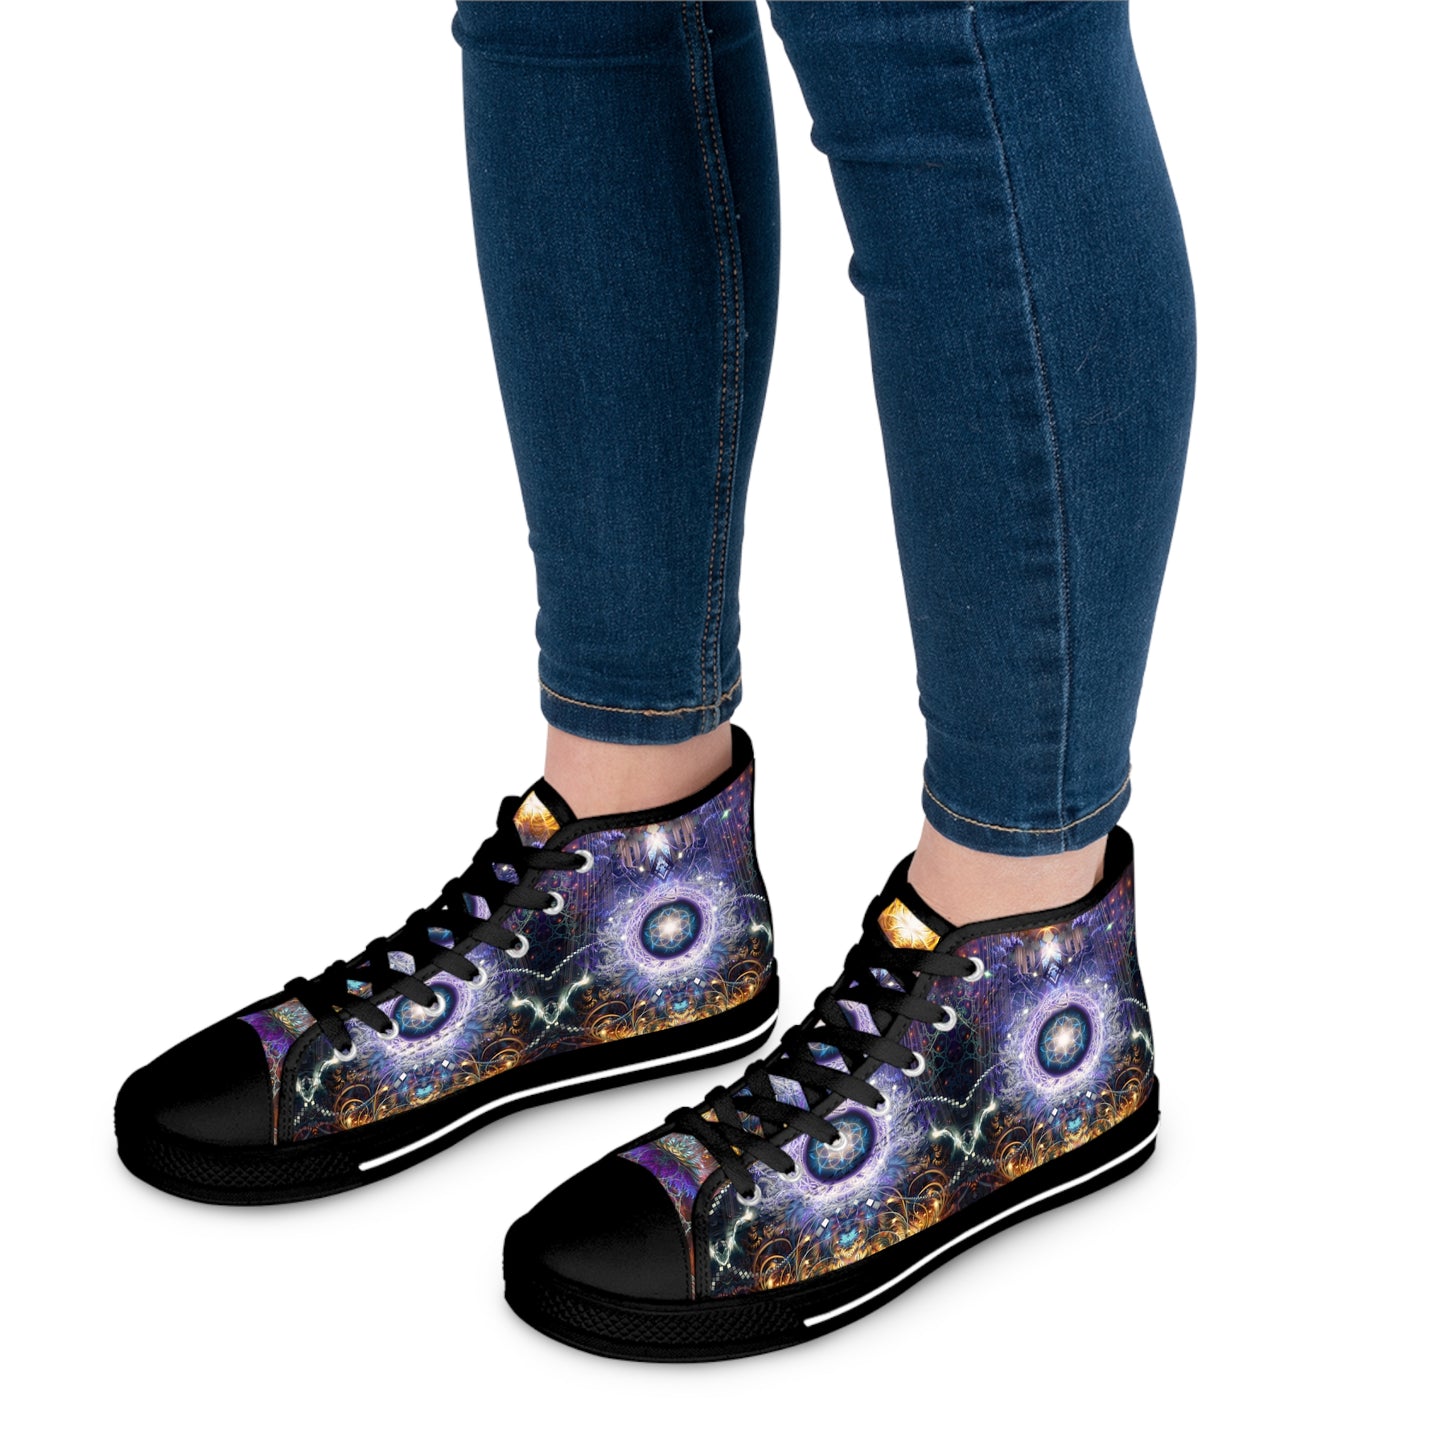 "Immortal Truth V2" WOMEN'S HIGH TOP SNEAKERS